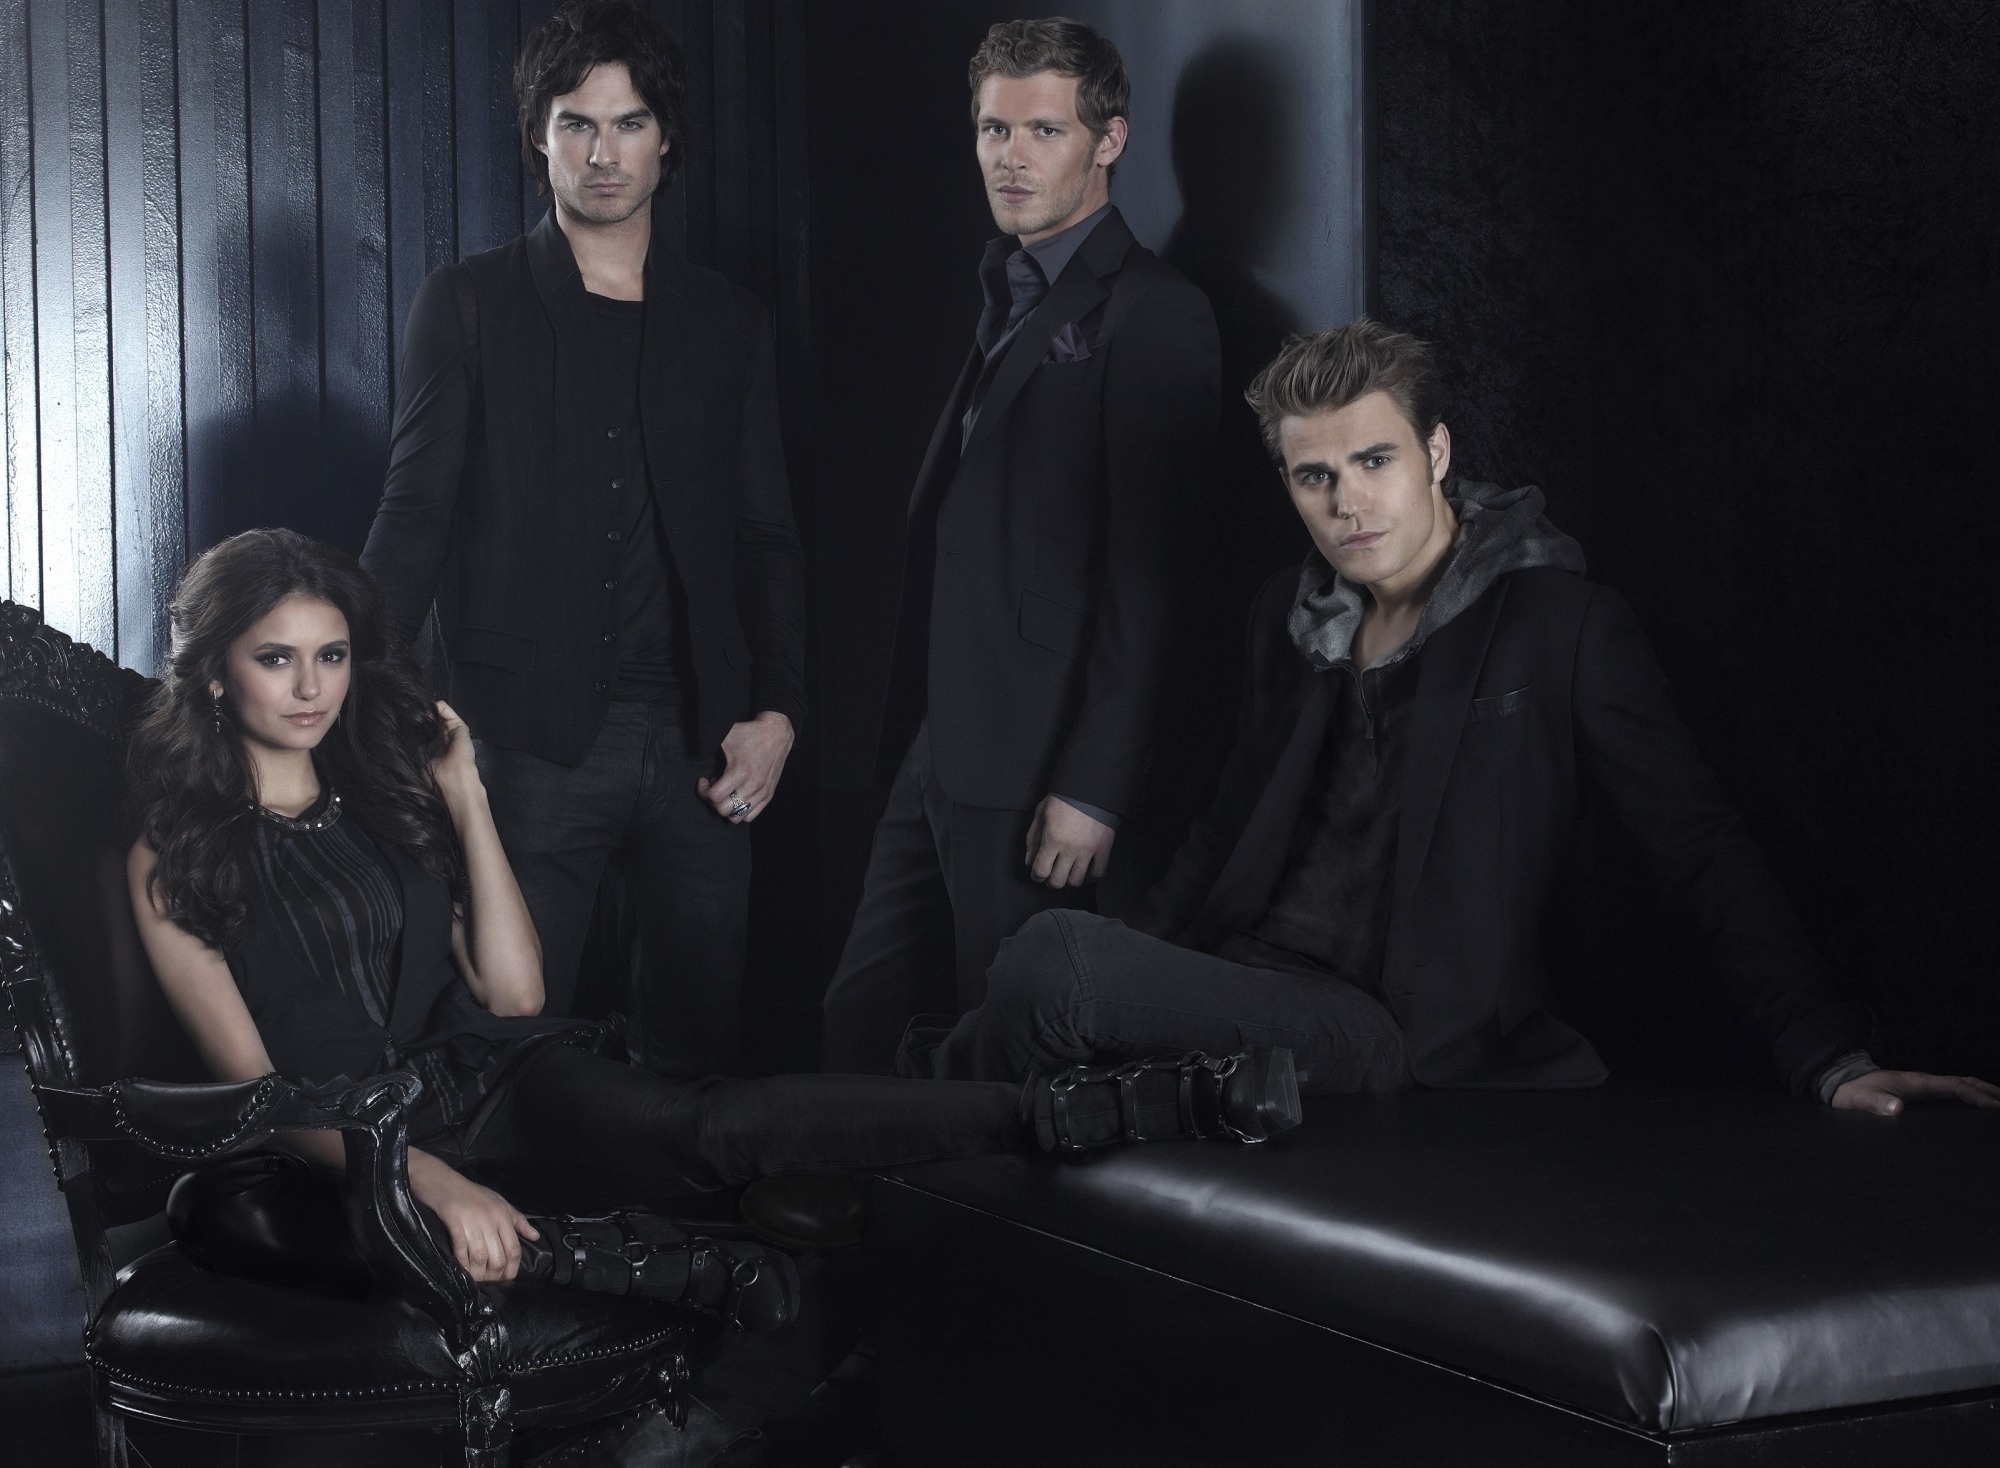 78 The Vampire Diaries HD Wallpapers | Backgrounds - Wallpaper Abyss